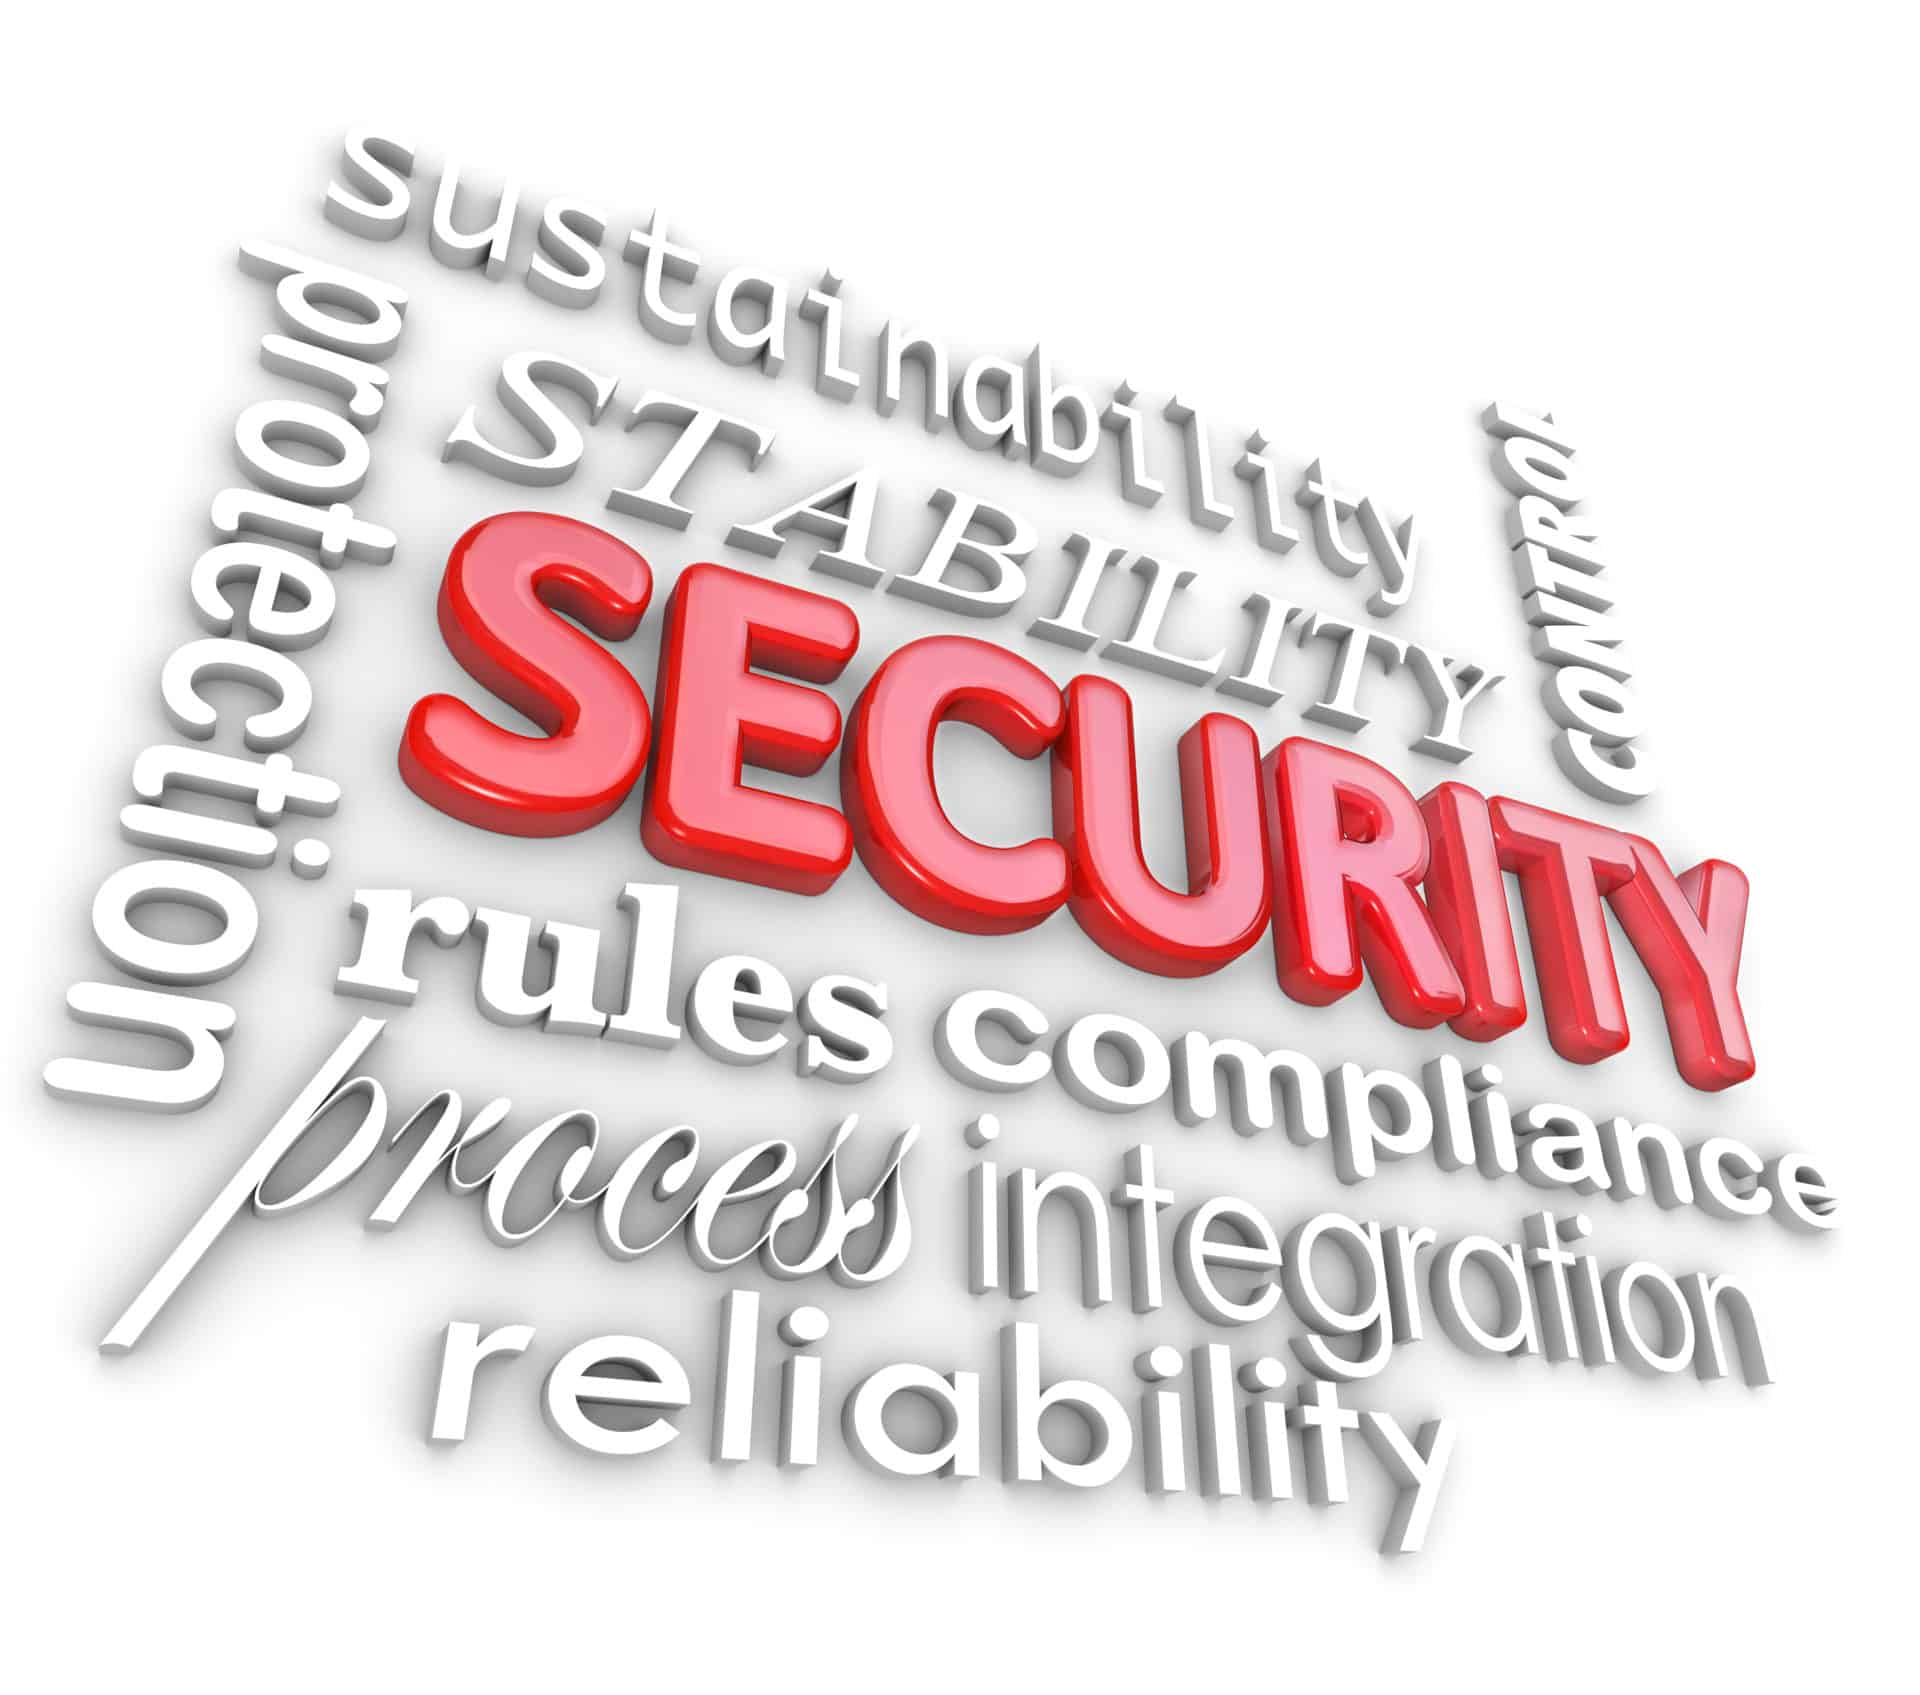 Security 3d words to illustrate information technology concepts and concerns for people working in the i.t. field in maintaining or administrating business networks